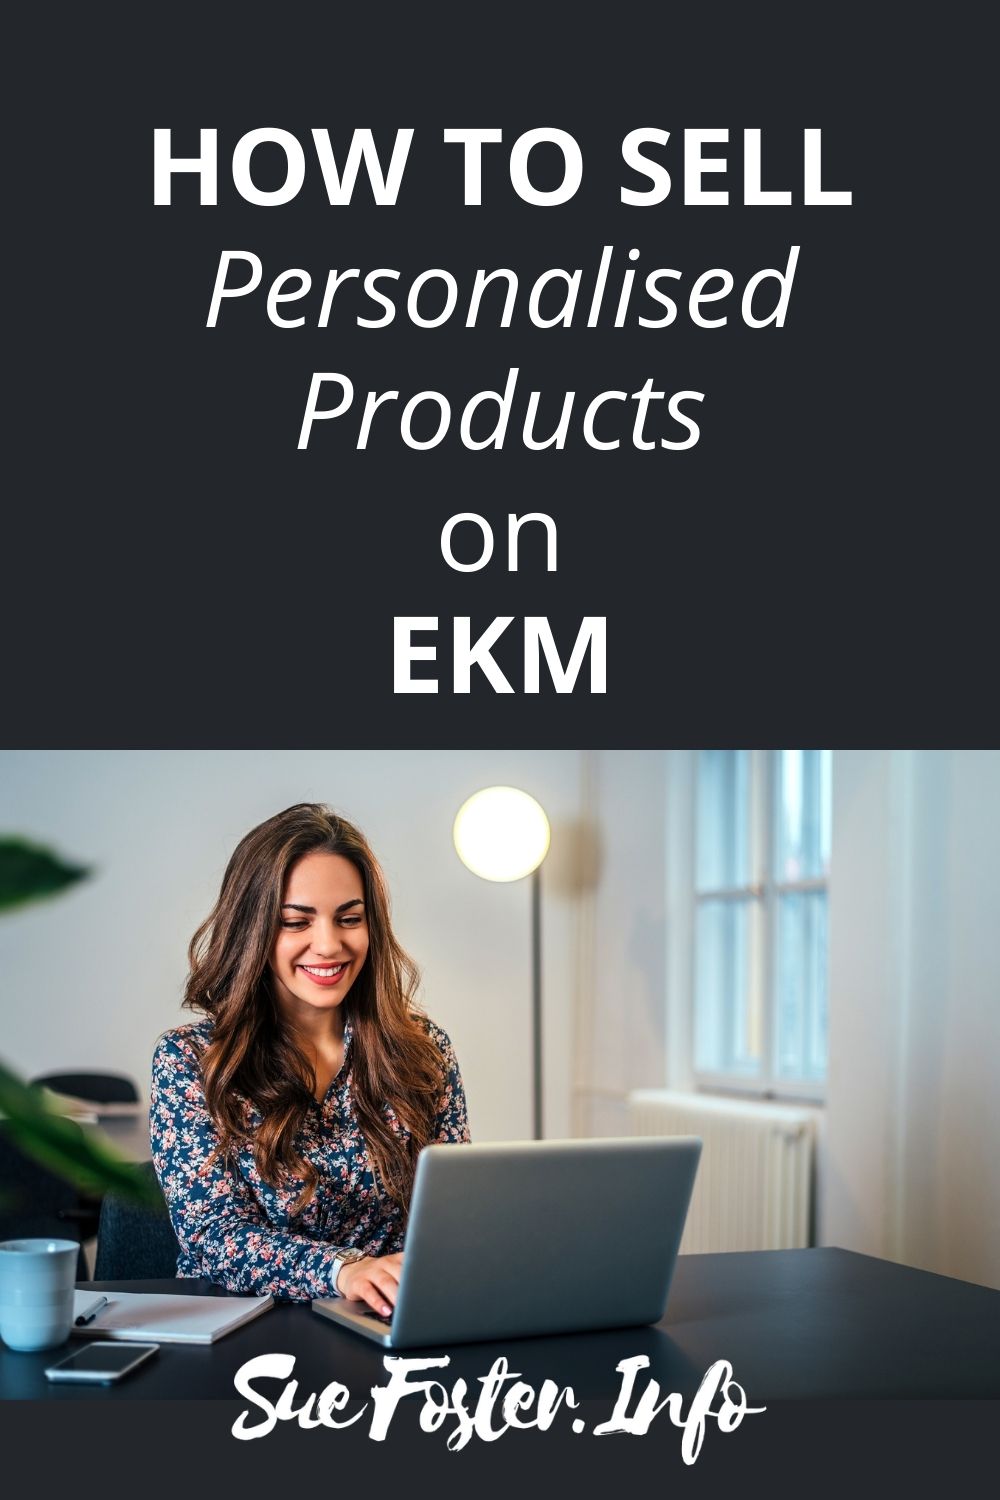 If you want to sell personalised products that you either create yourself or have drop shipped for you, you’re going to need an e-commerce platform like EKM.